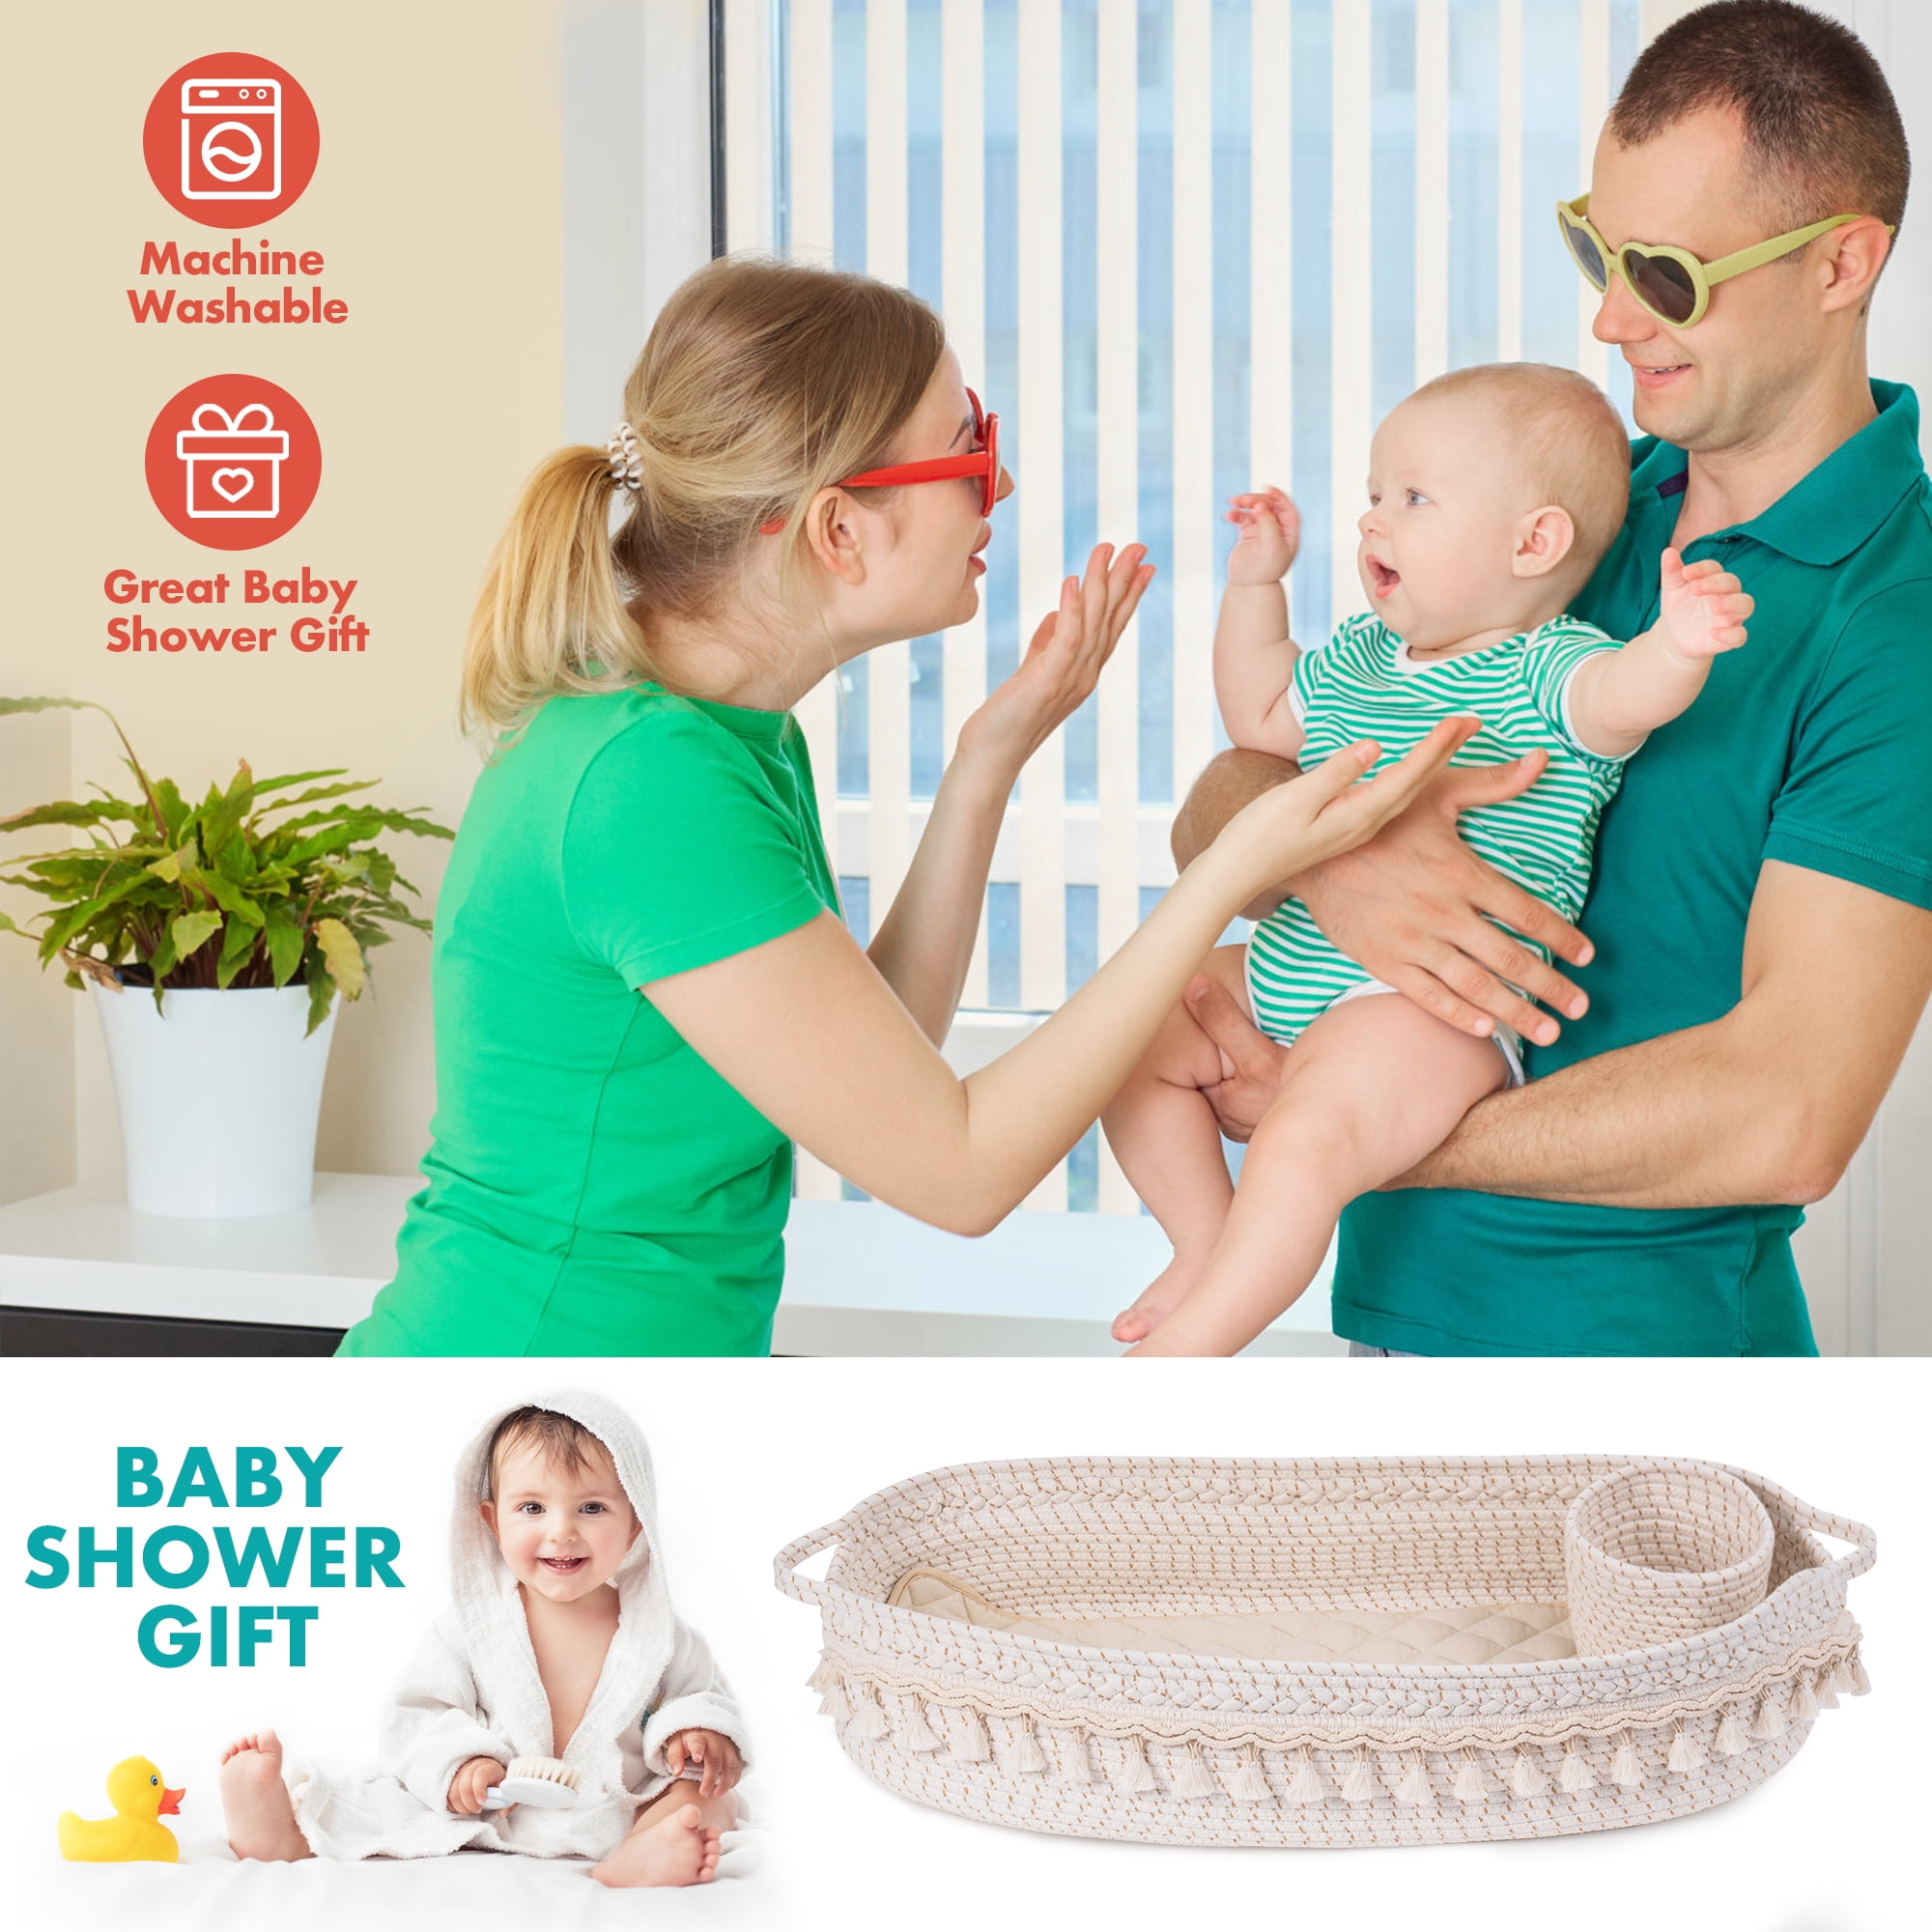  UBBCARE Baby Changing Basket, Cotton Rope Moses Basket for  Newborn, Foam Pad Changing Basket with Waterproof Cover, Unisex Changing  Table Topper for Dresser - Beige & Brown : Baby